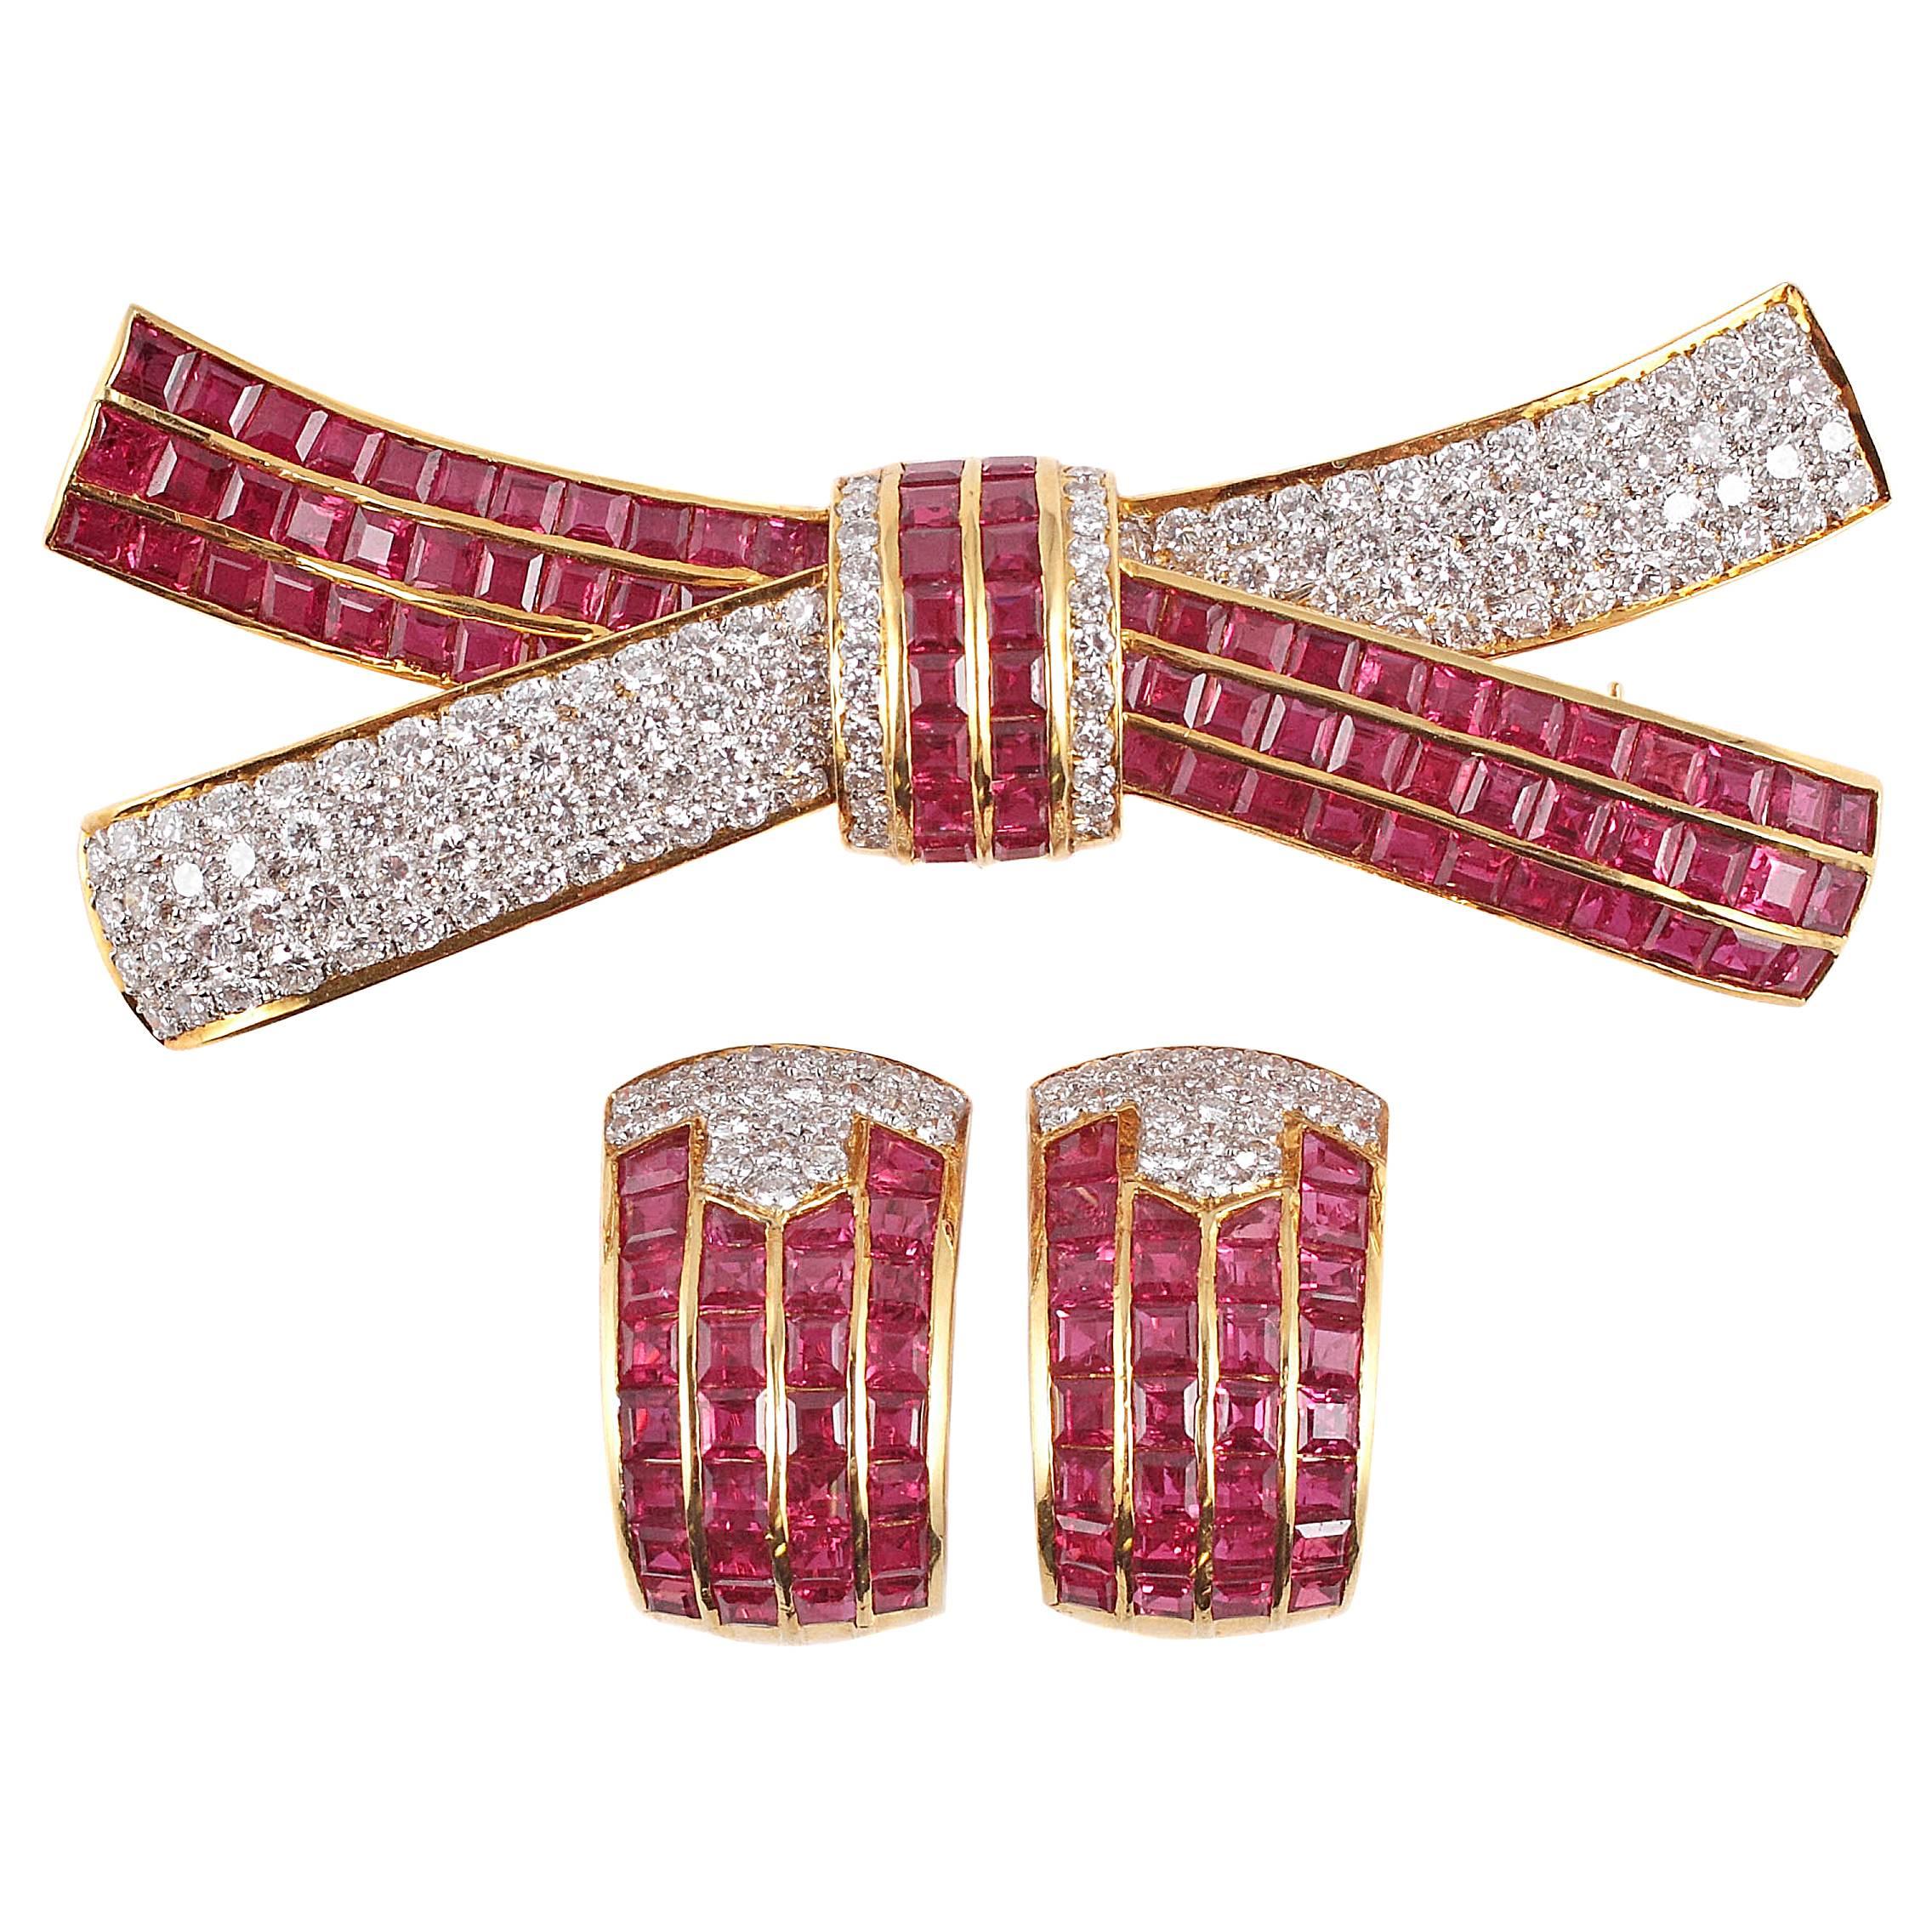  Ruby diamond brooch with matching earrings